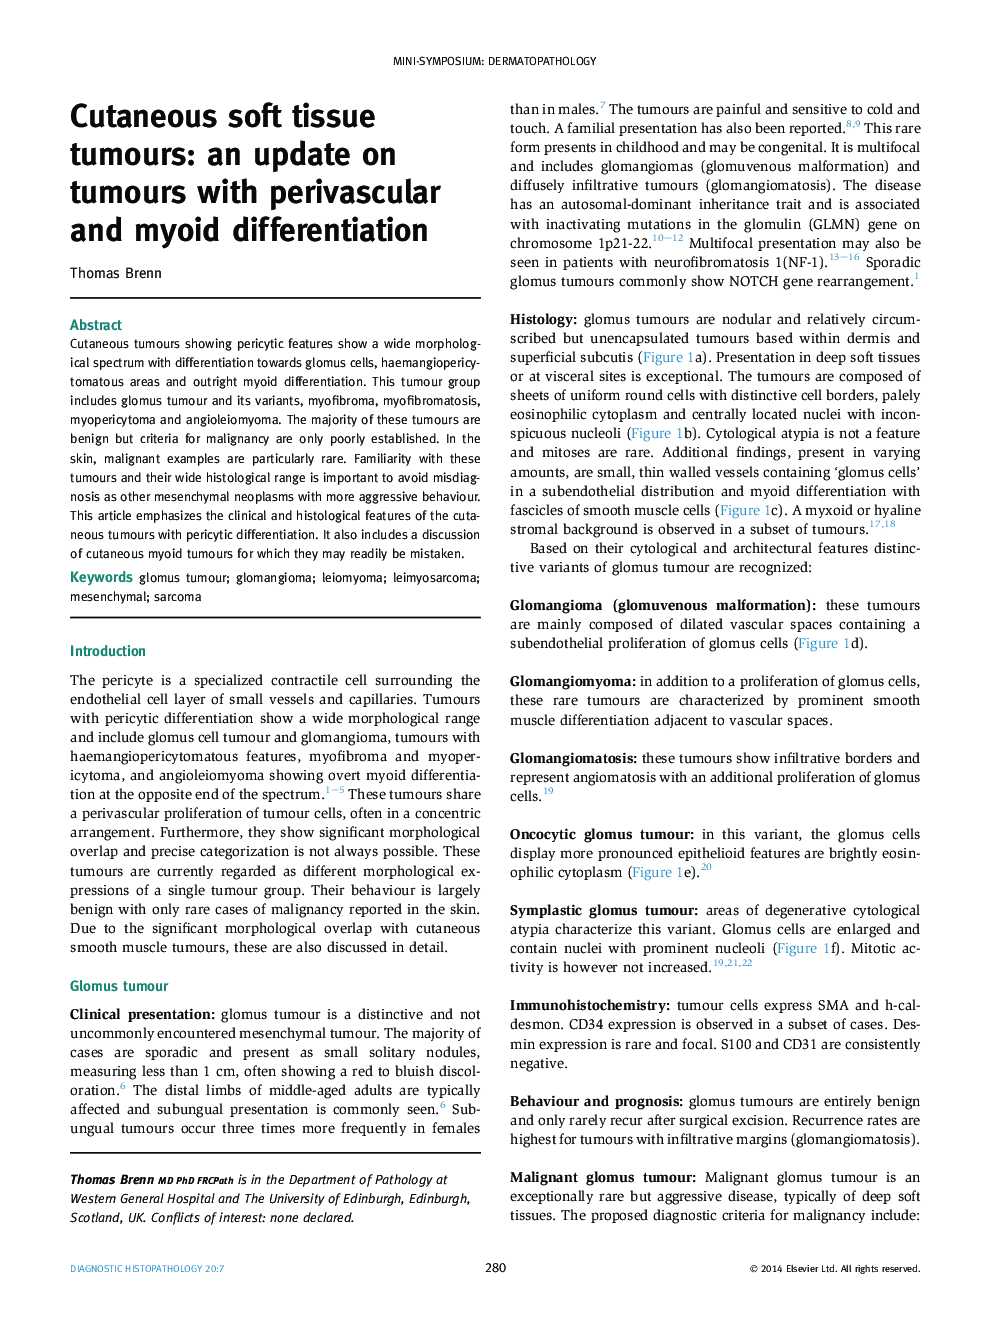 Cutaneous soft tissue tumours: an update on tumours with perivascular and myoid differentiation